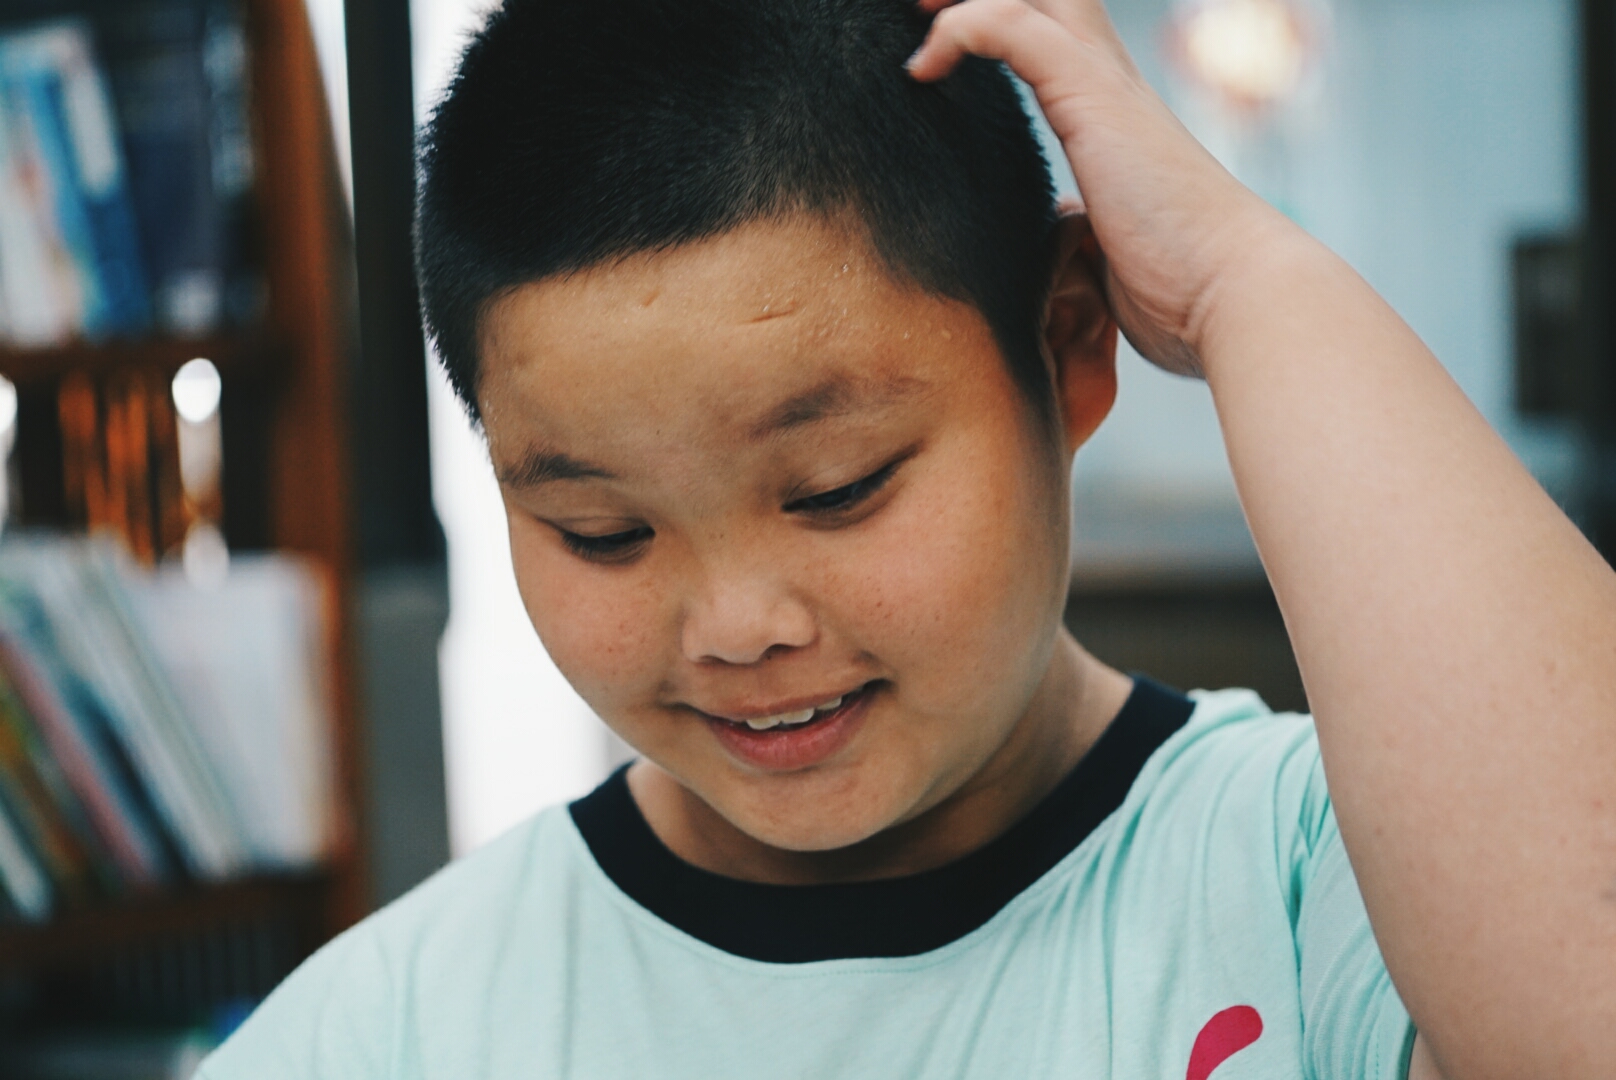 a boy is touching his hair while looking down